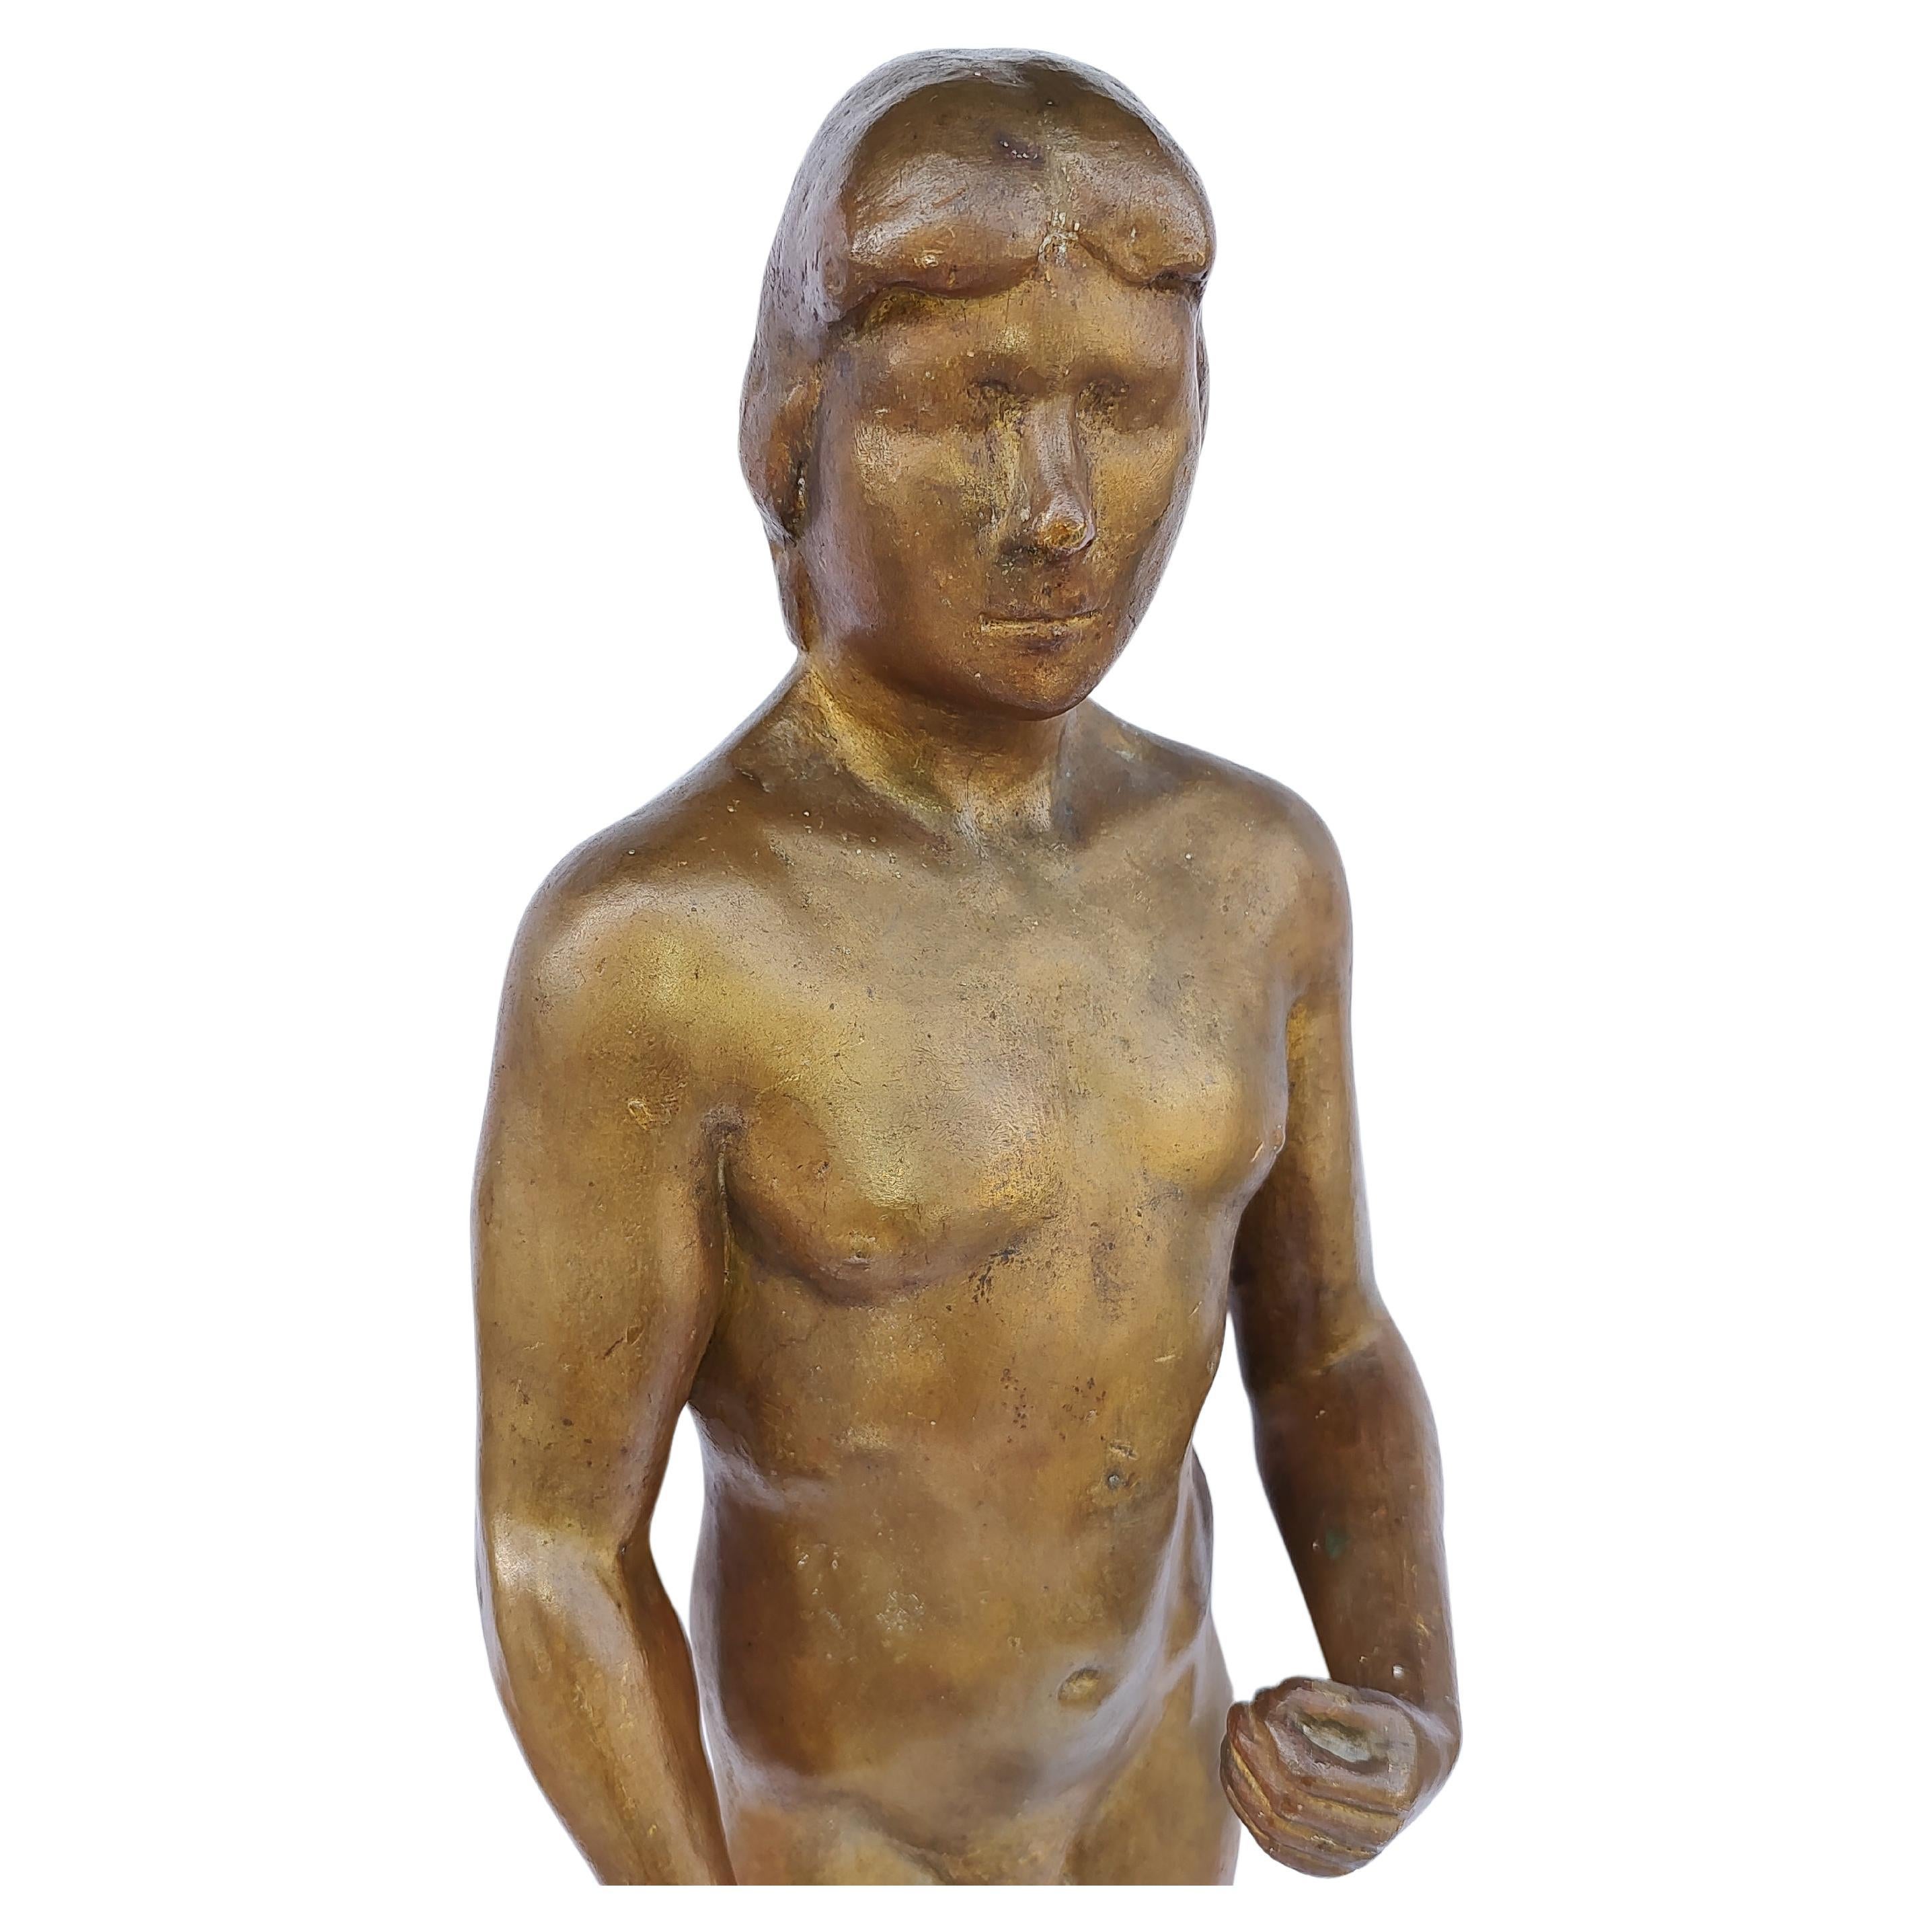 Midcentury Bronze Sculpture of a Nude Male Foundry Guss Barth Rinteen In Good Condition For Sale In Port Jervis, NY